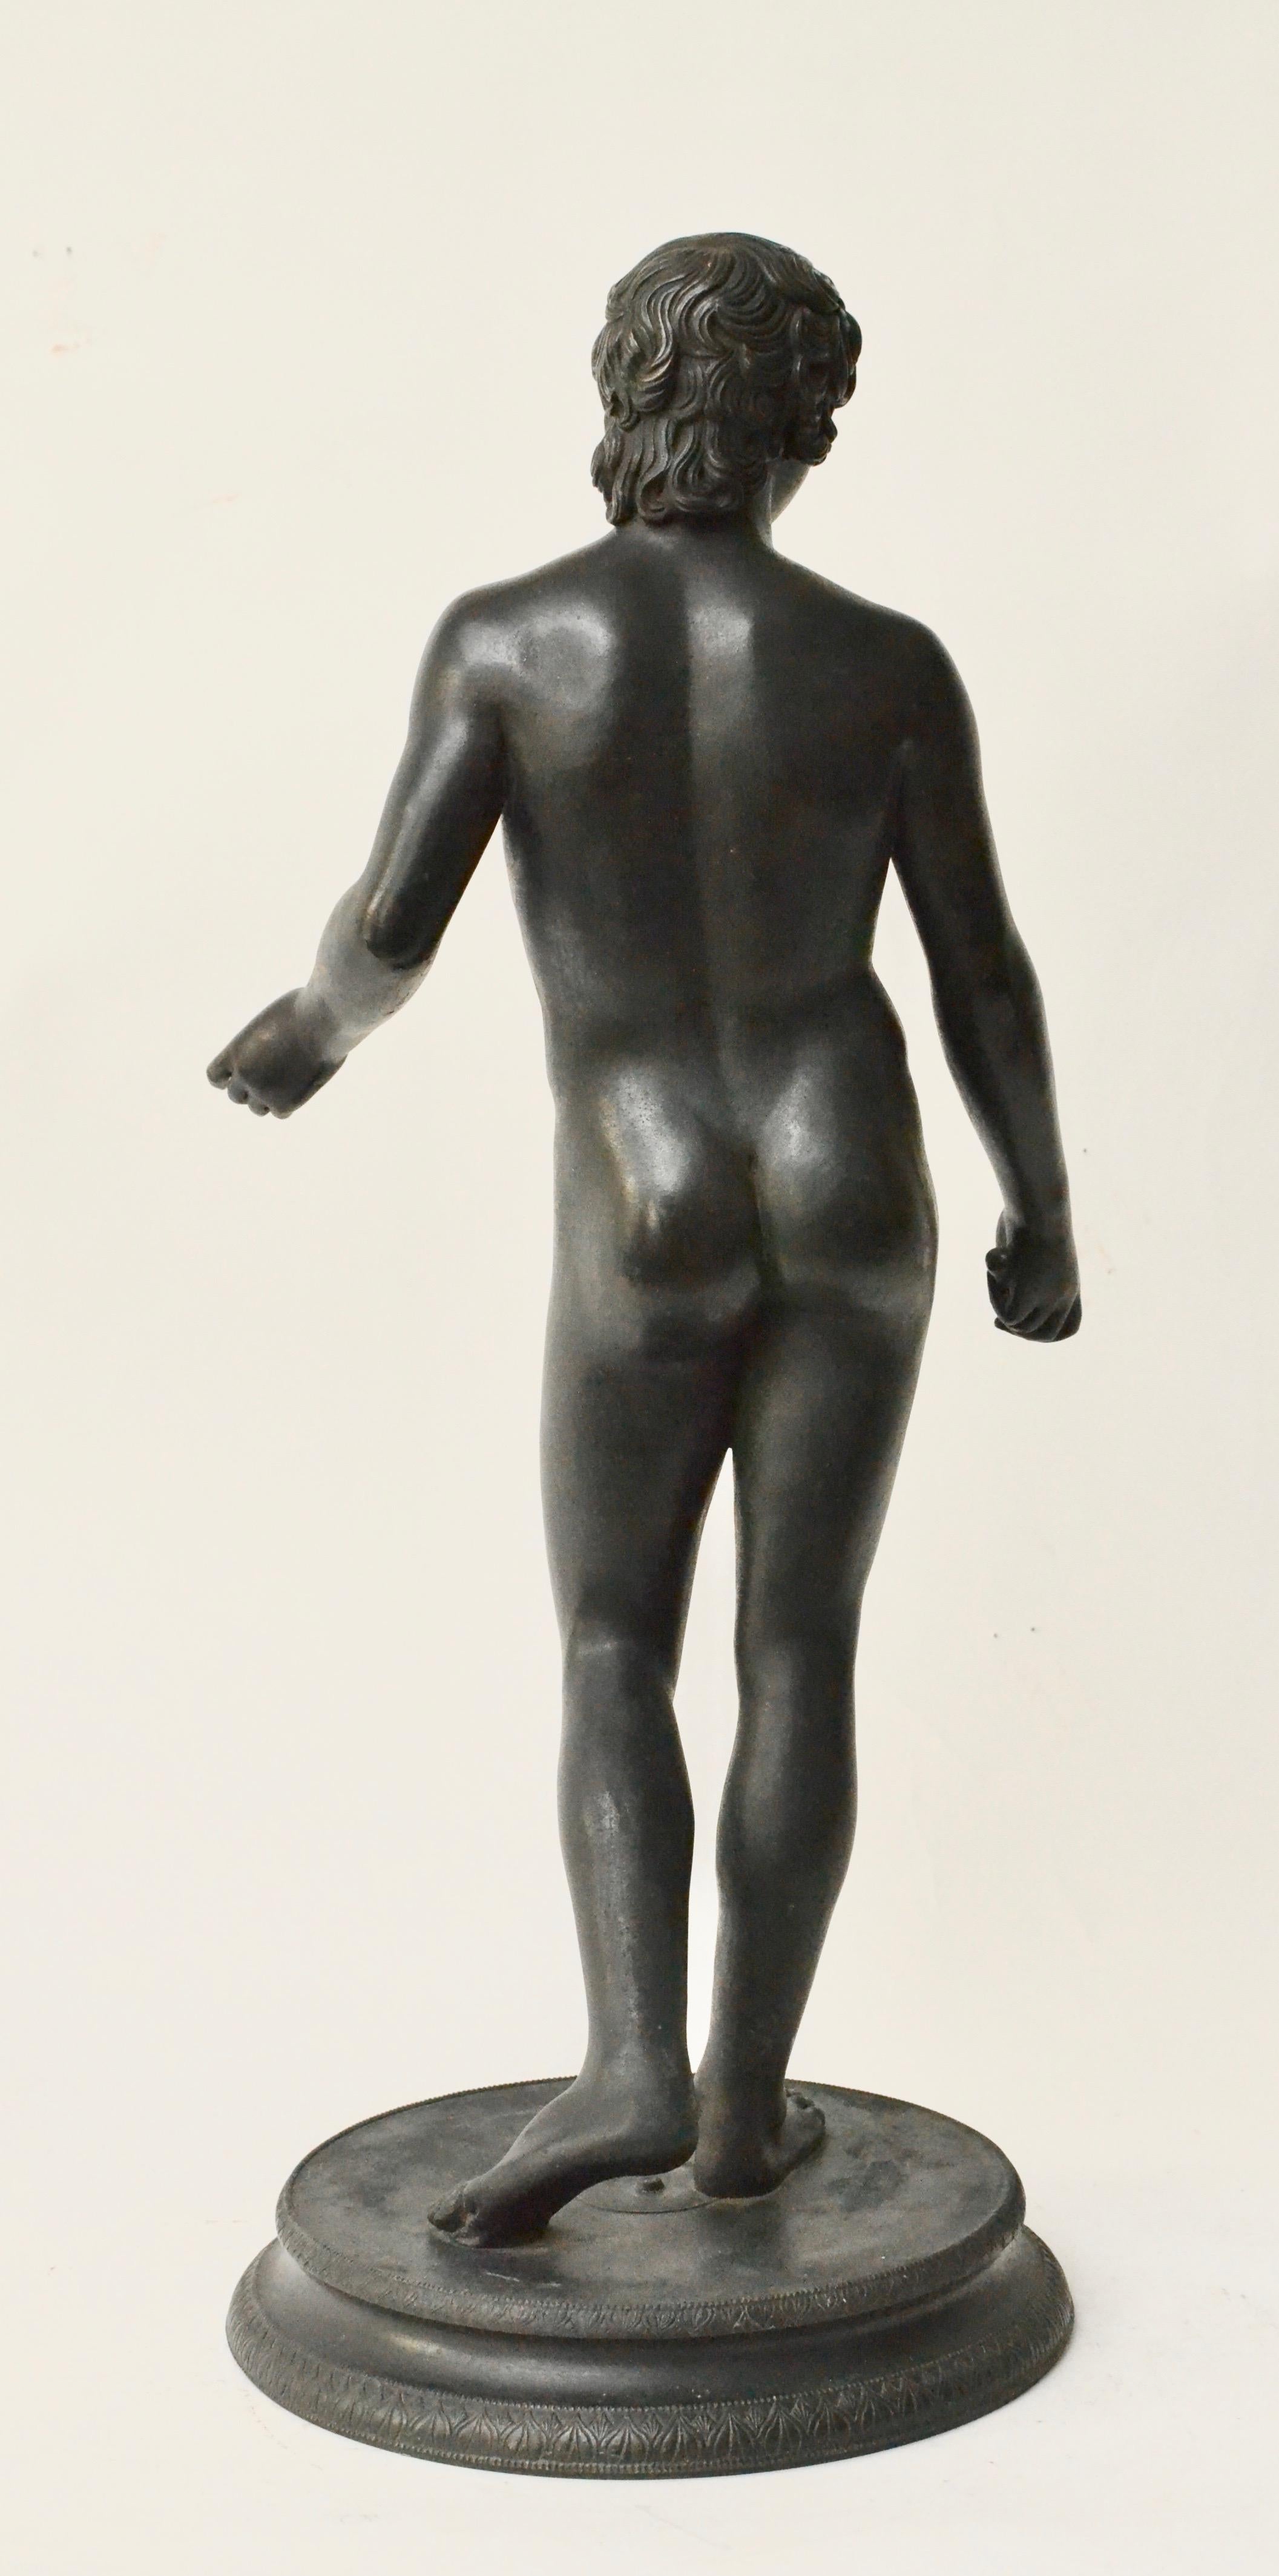 A Italian bronze sculpture of Antinous Farnese made in Neapel, 19th century. After the antique - now on display in the Naples National Archaeological Museum. 

The Antinous Farnese is a specific marble sculptural representation of Antinous, named